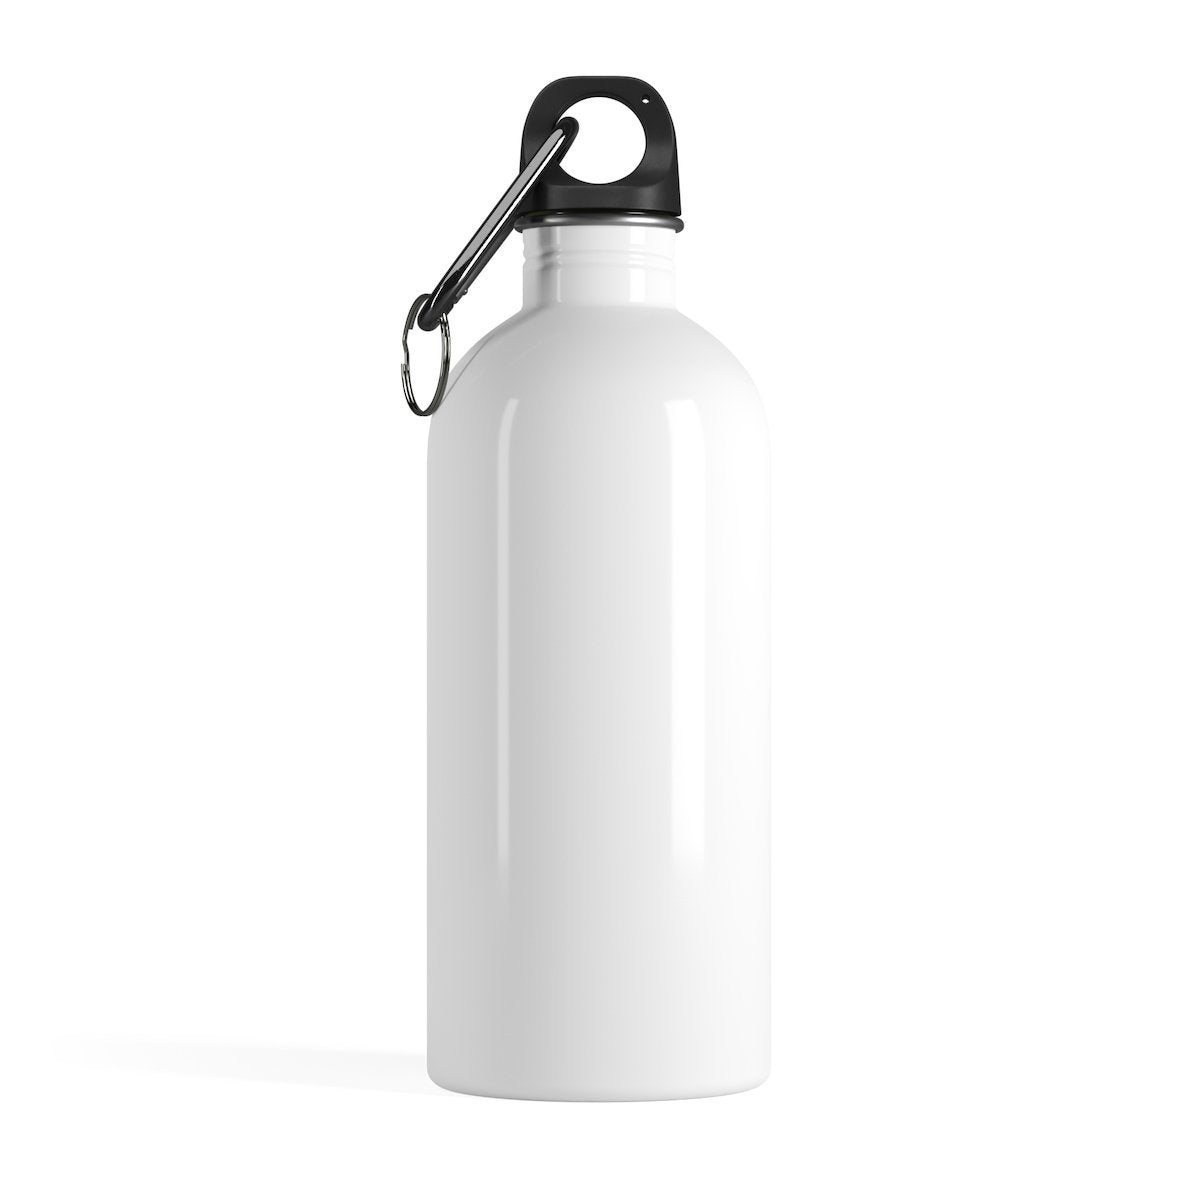 This cat water bottle is made of light weight  high-quality stainless steel.